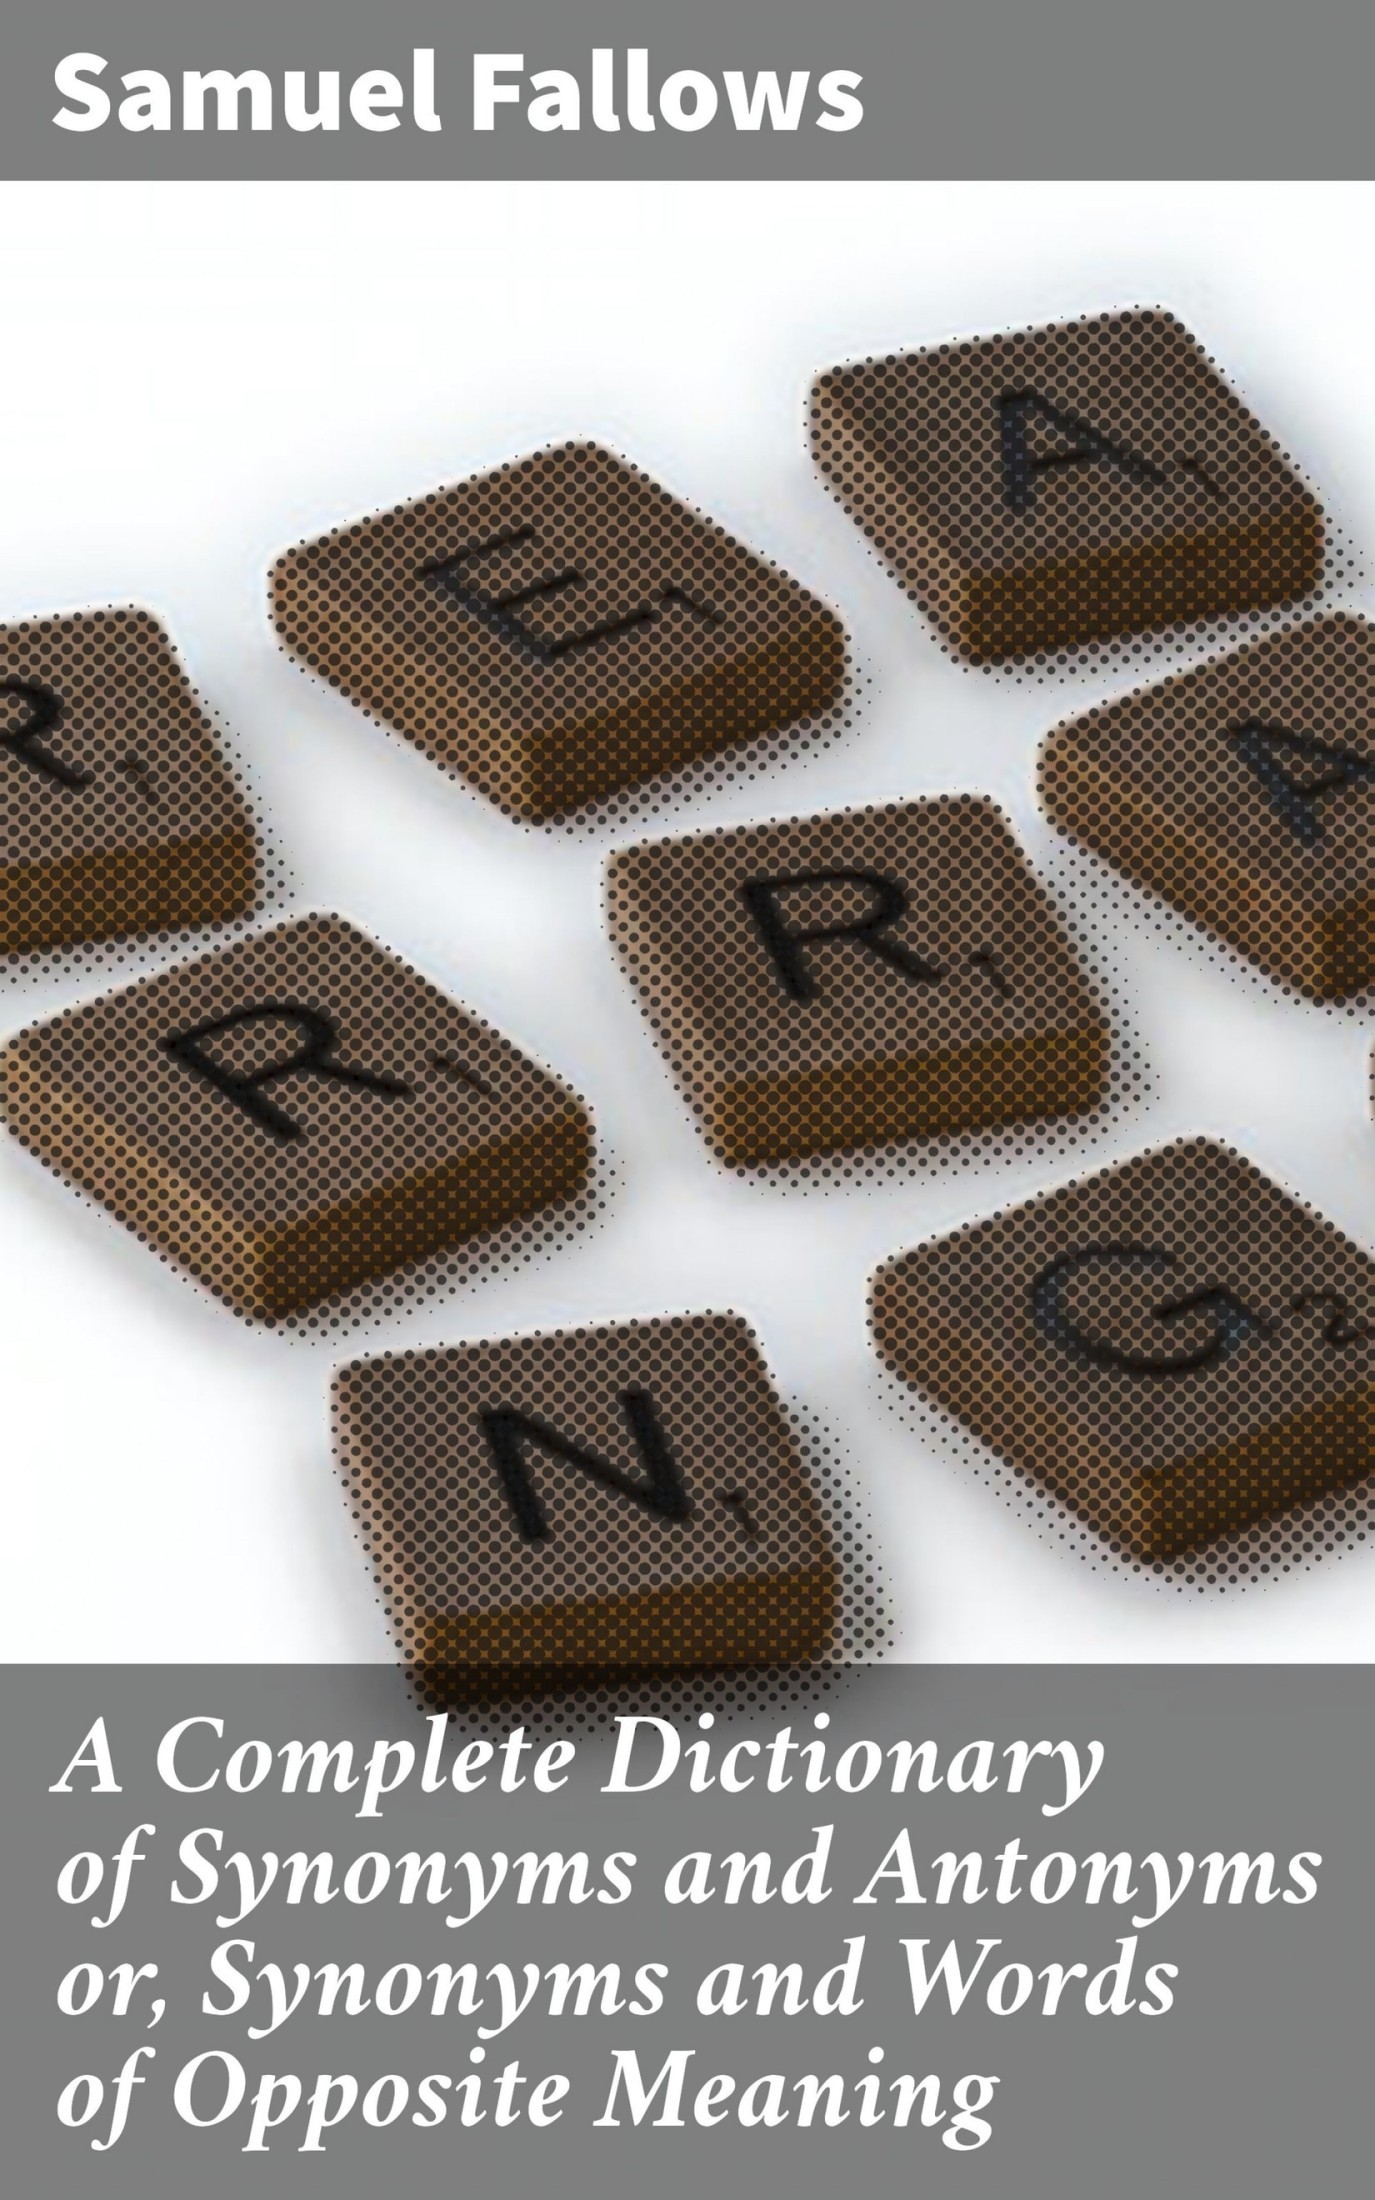 A Complete Dictionary of Synonyms and Antonyms or, Synonyms and Words of Opposite Meaning